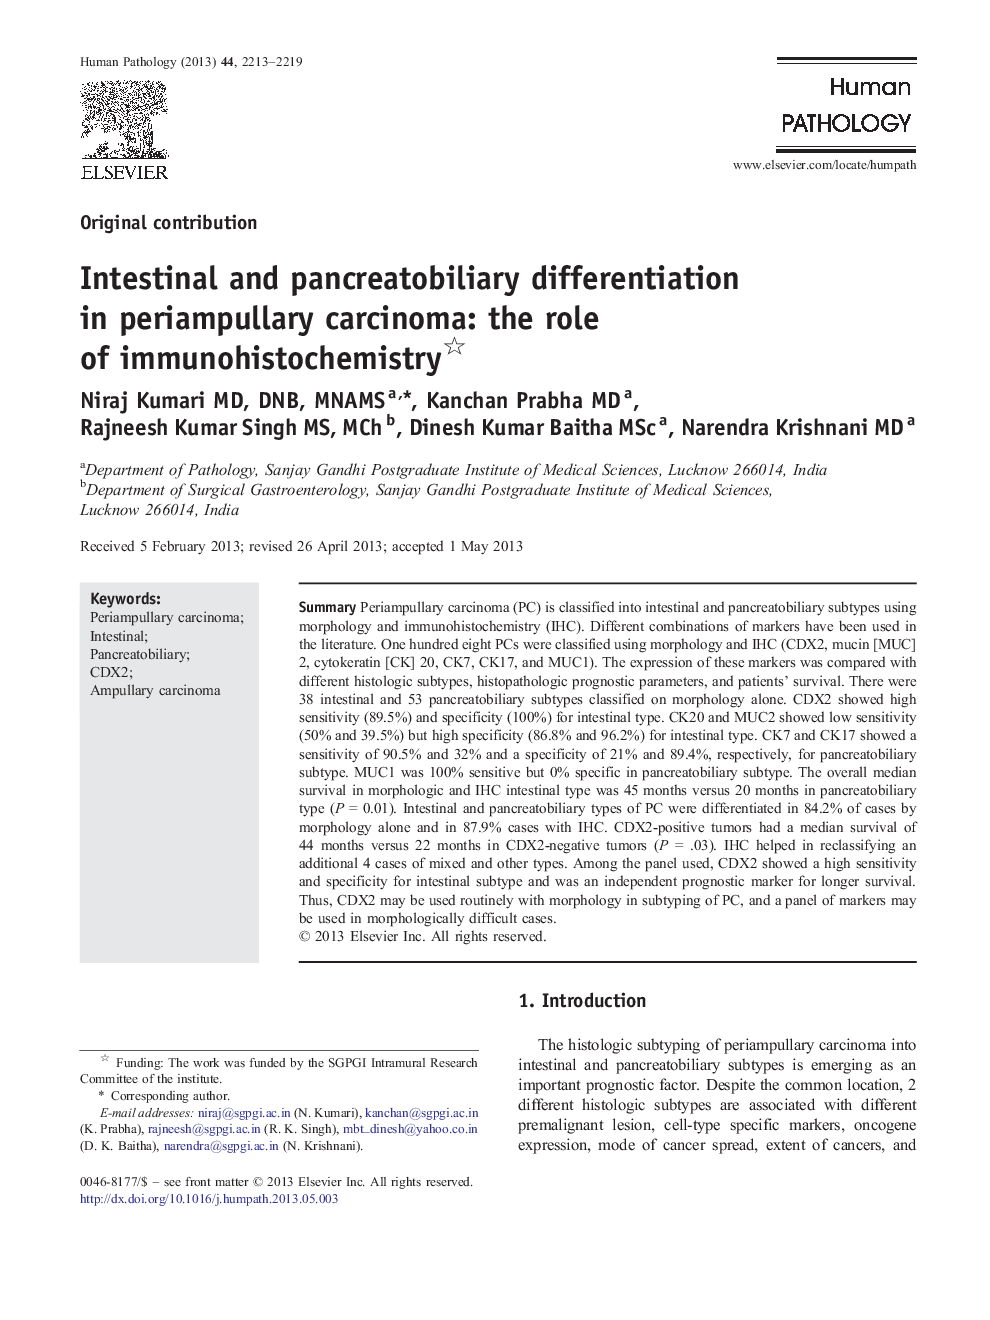 Intestinal and pancreatobiliary differentiation in periampullary carcinoma: the role of immunohistochemistry 